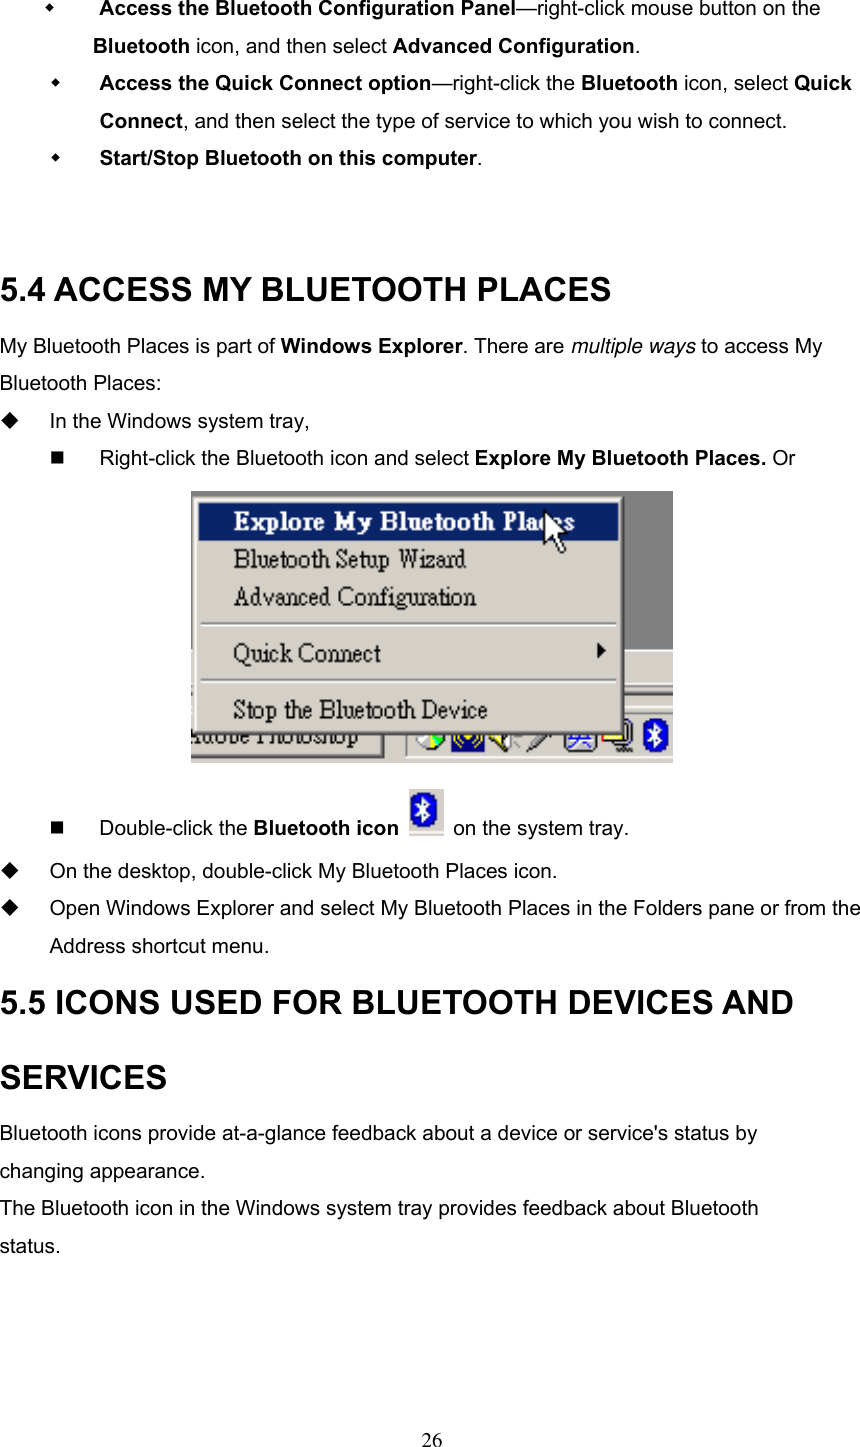    Access the Bluetooth Configuration Panel—right-click mouse button on the          Bluetooth icon, and then select Advanced Configuration.   Access the Quick Connect option—right-click the Bluetooth icon, select Quick Connect, and then select the type of service to which you wish to connect.   Start/Stop Bluetooth on this computer.   5.4 ACCESS MY BLUETOOTH PLACES My Bluetooth Places is part of Windows Explorer. There are multiple ways to access My Bluetooth Places:     In the Windows system tray,     Right-click the Bluetooth icon and select Explore My Bluetooth Places. Or    Double-click the Bluetooth icon   on the system tray.   On the desktop, double-click My Bluetooth Places icon.     Open Windows Explorer and select My Bluetooth Places in the Folders pane or from the Address shortcut menu. 5.5 ICONS USED FOR BLUETOOTH DEVICES AND SERVICES Bluetooth icons provide at-a-glance feedback about a device or service&apos;s status by changing appearance. The Bluetooth icon in the Windows system tray provides feedback about Bluetooth status.     26 